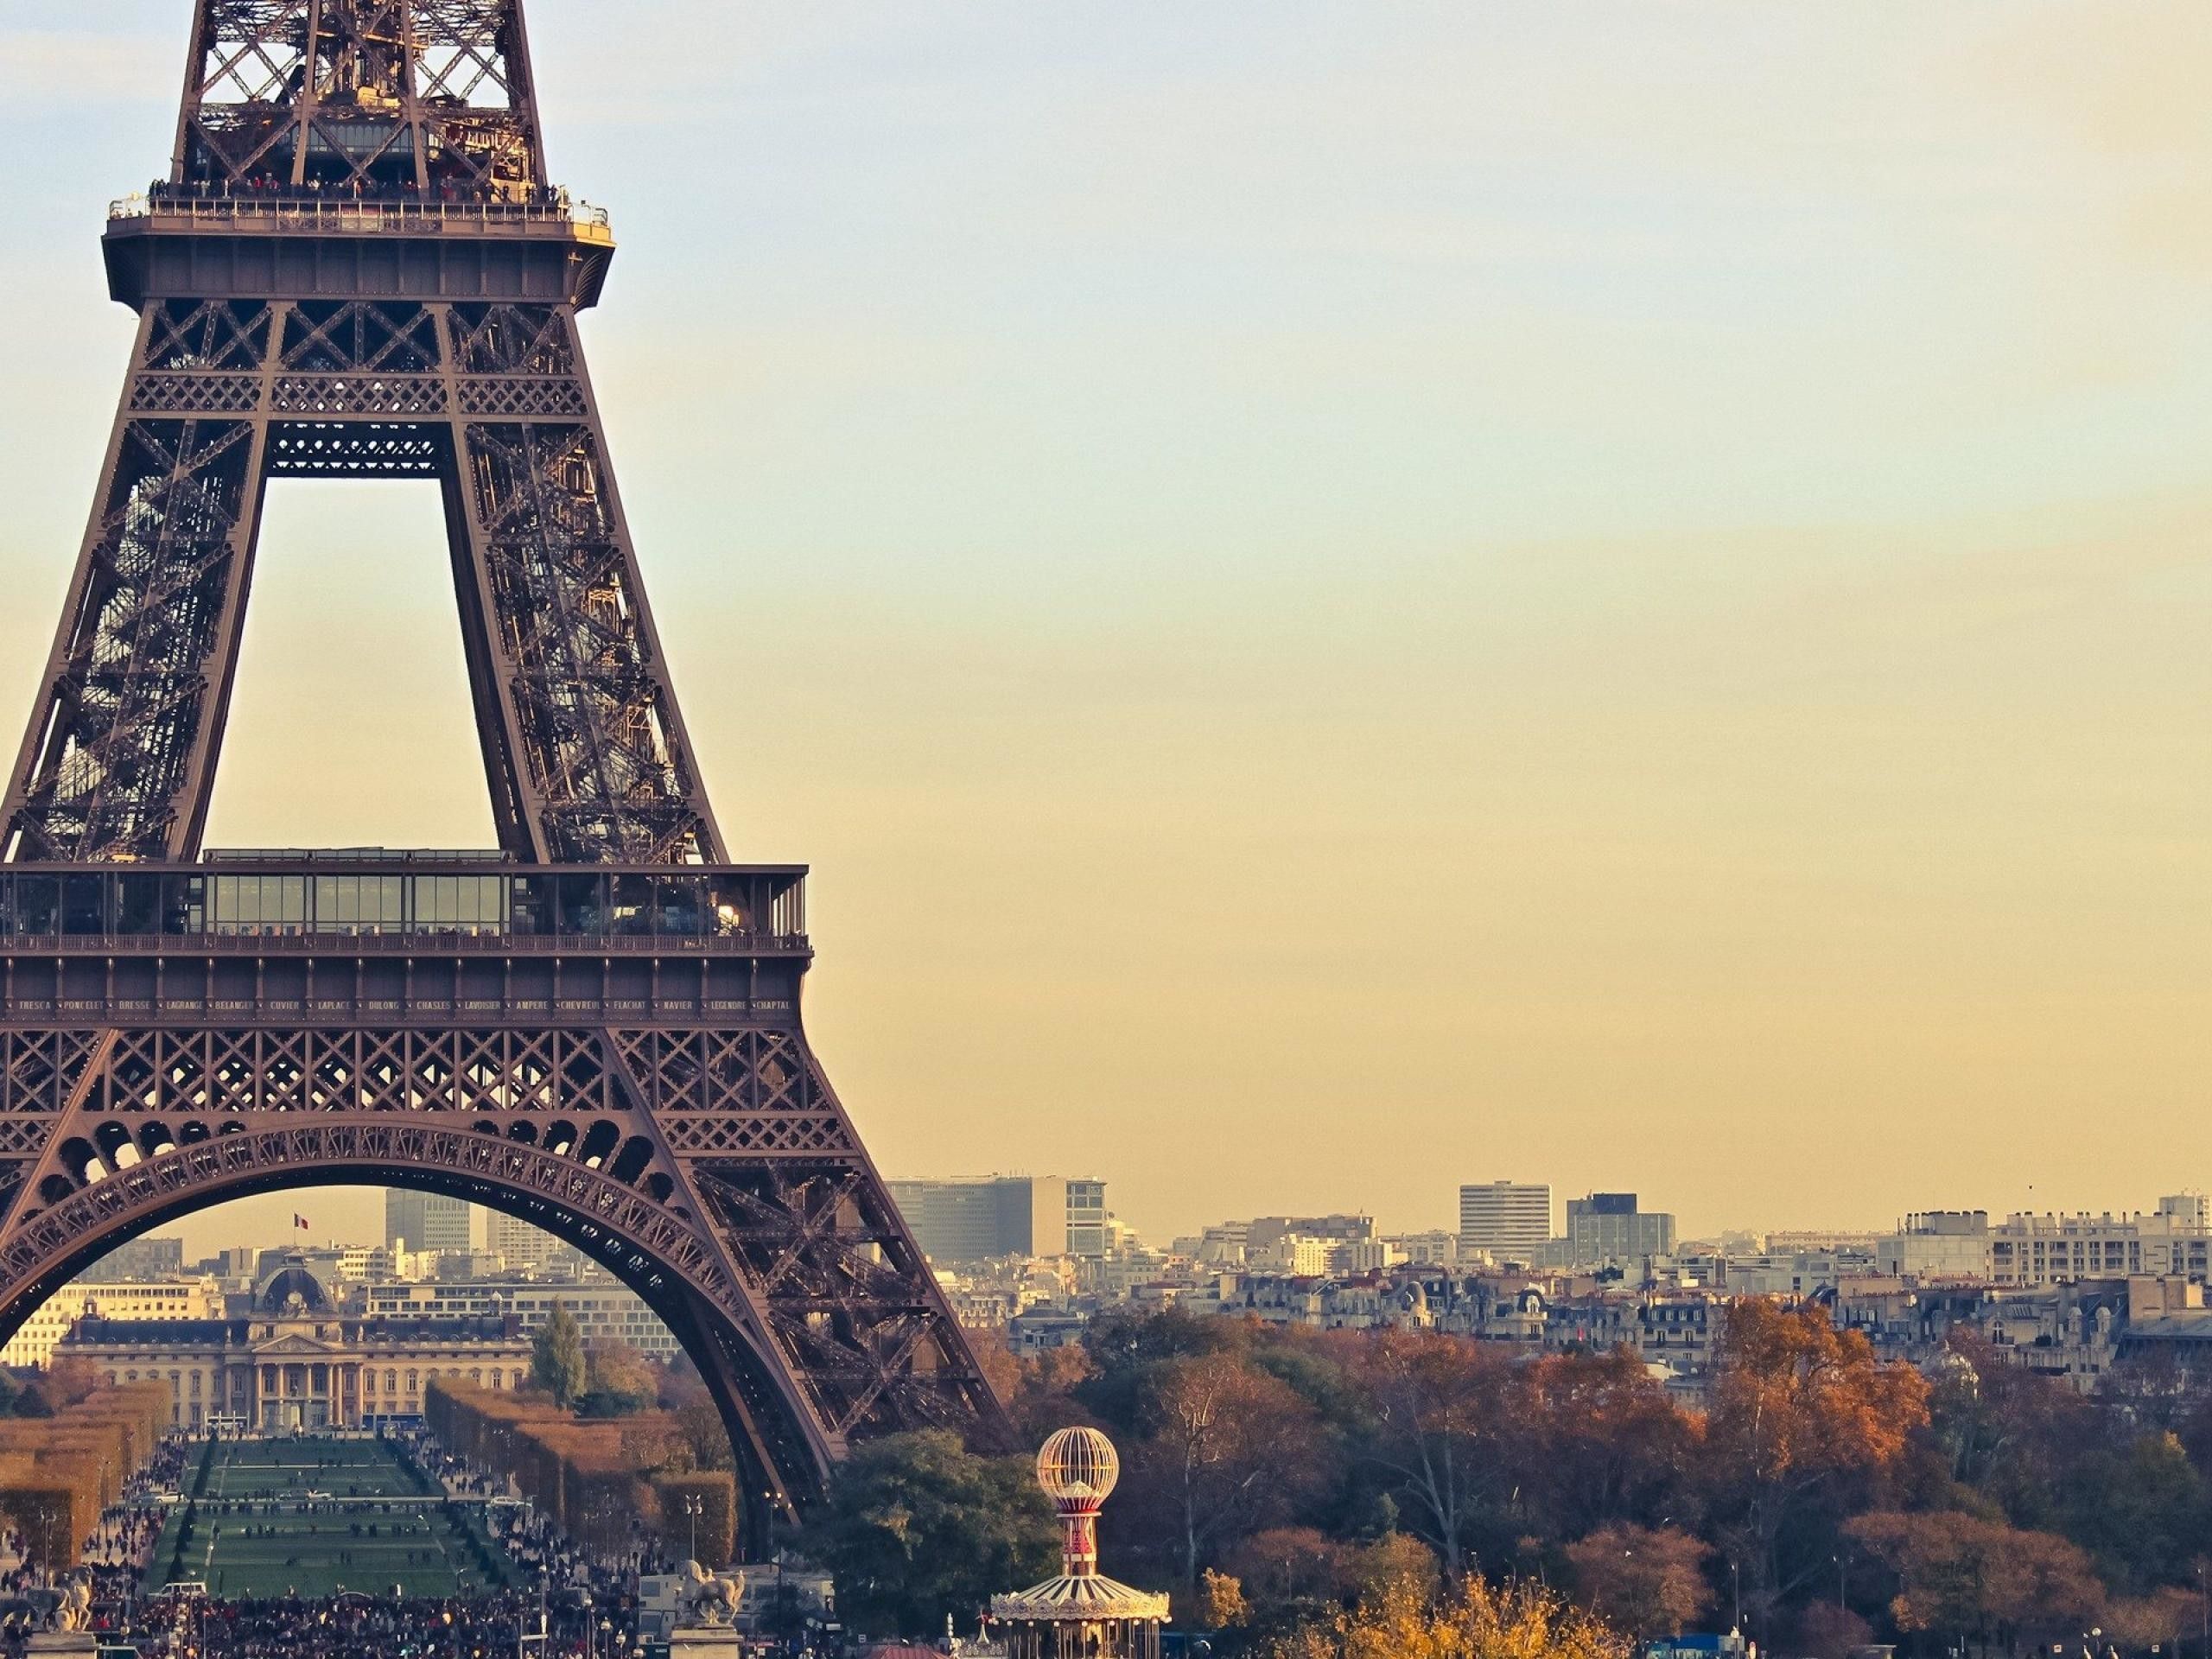 The eiffel tower is seen in a city - Paris